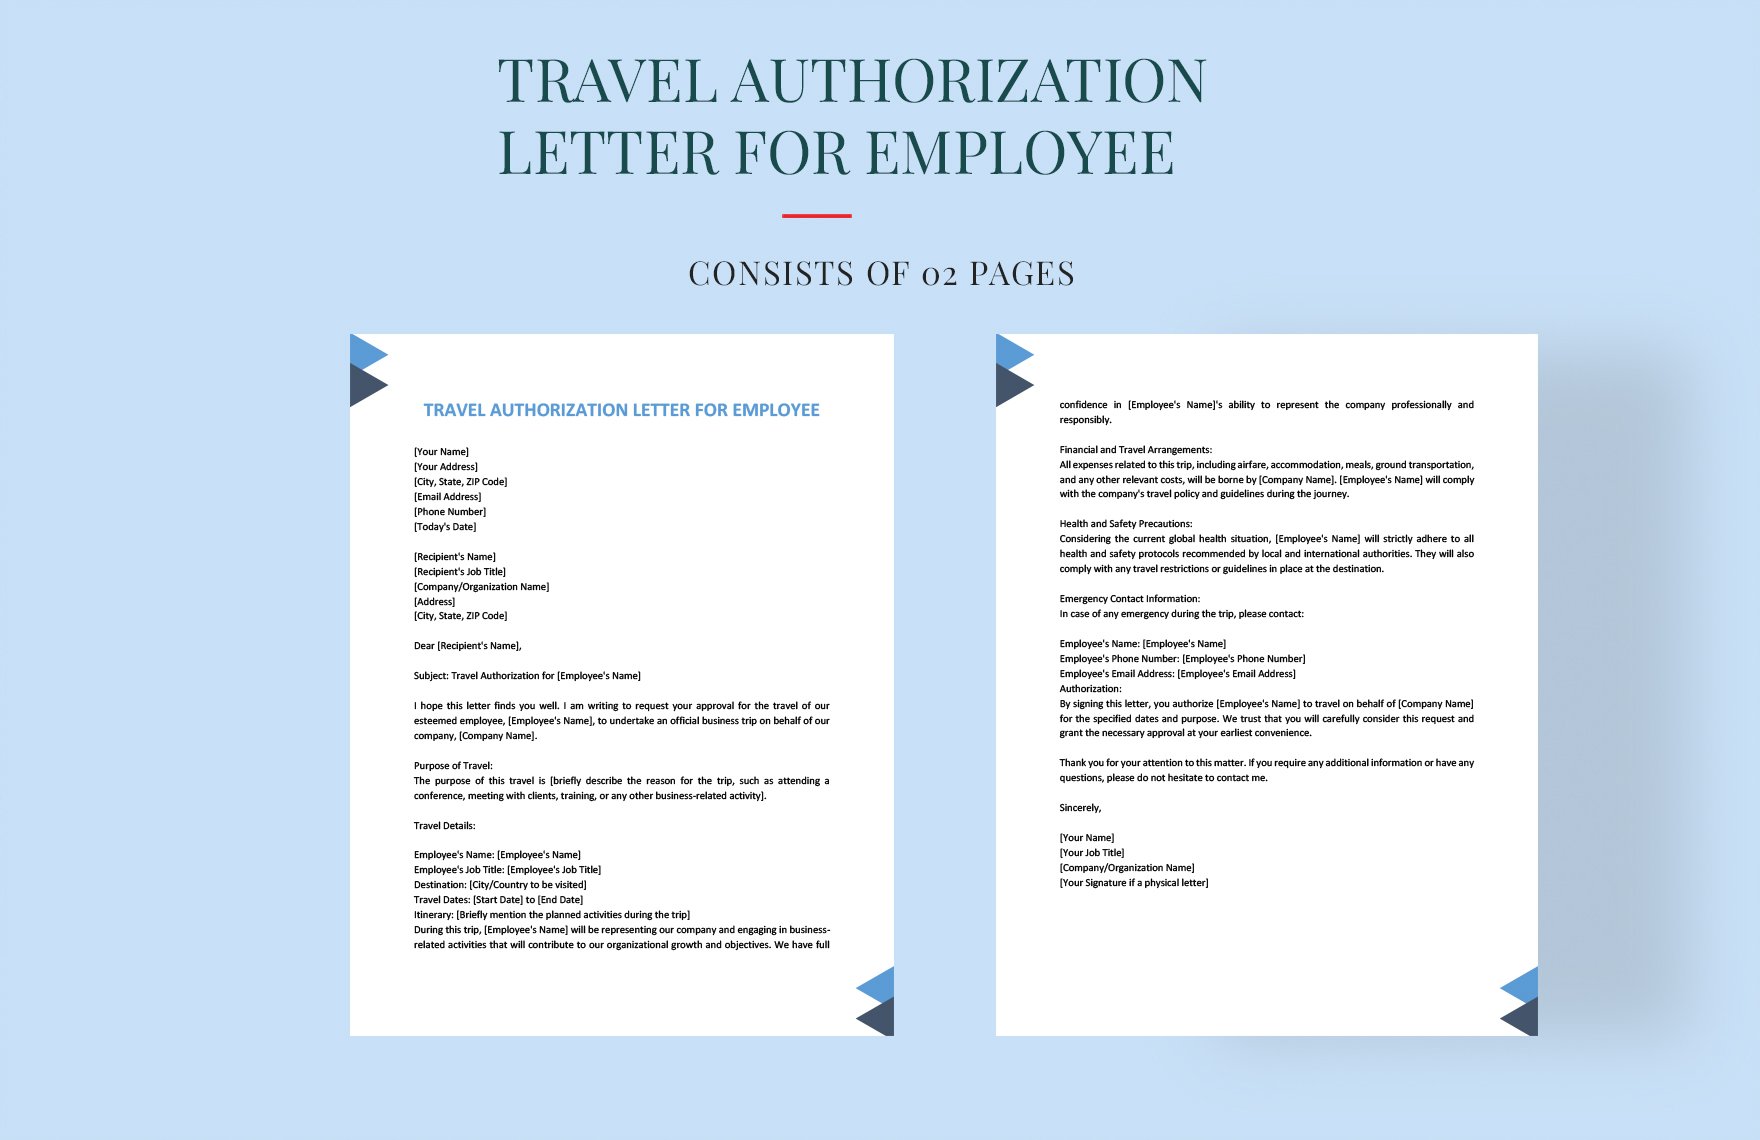 Travel Authorization Letter For Employee in Word, Google Docs, PDF, Apple Pages